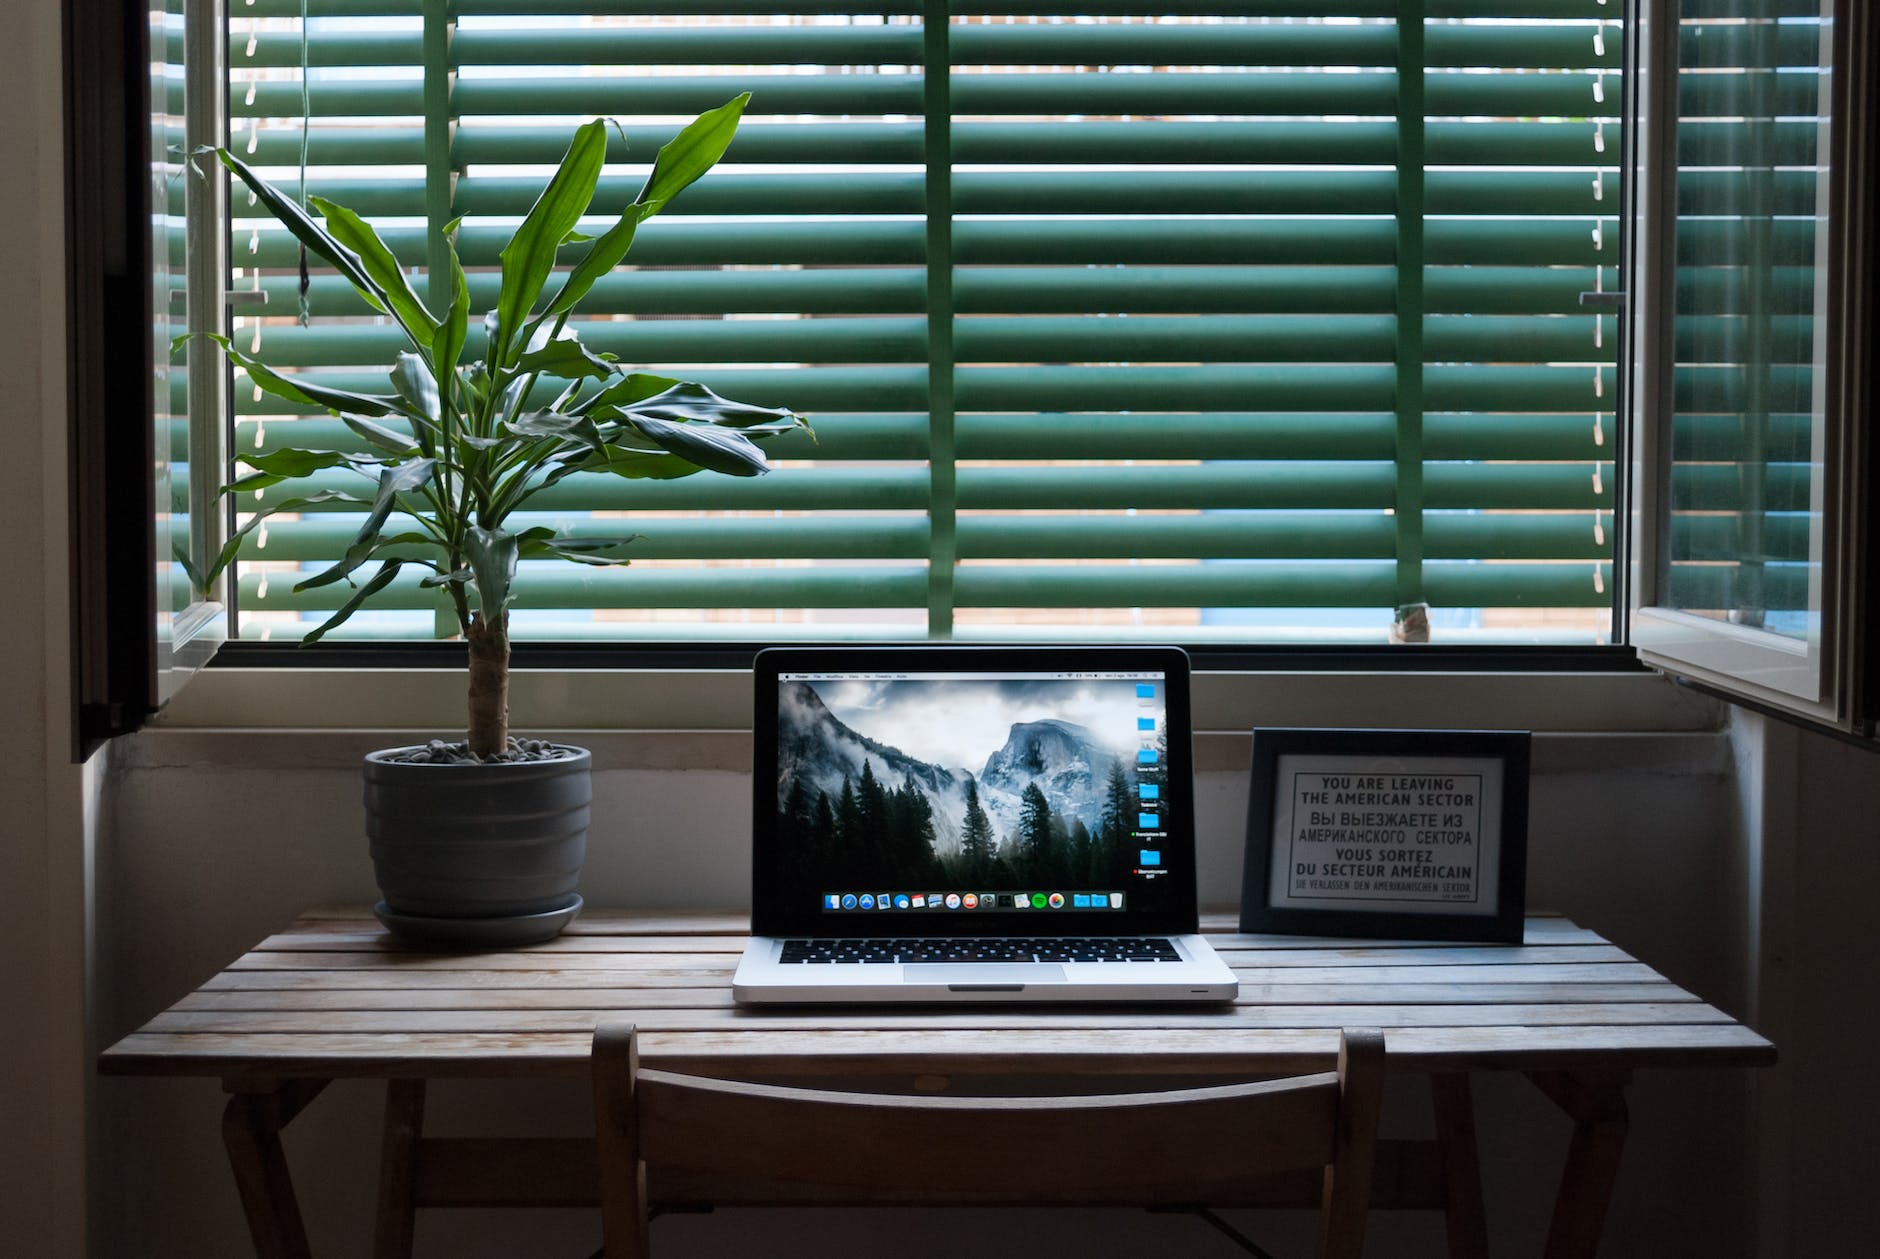 Copia de seguridad de Windows photo of macbook air on a table next to house plant and picture frame